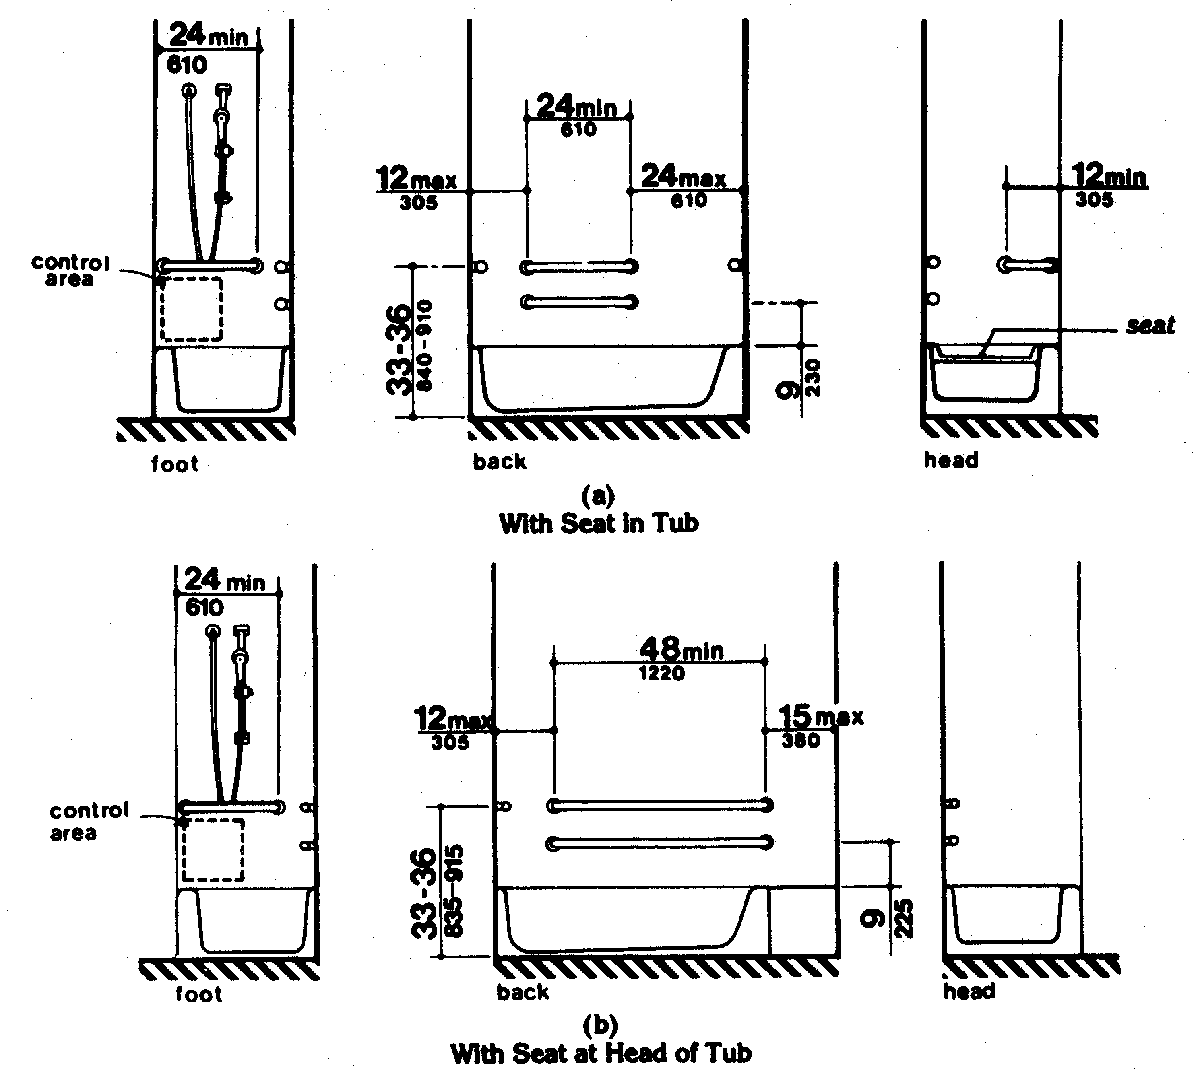 Line drawing showing side view/section of two bathtubs (a and b) - one equipped with a seat in the tub and the other with a built-in seat at the head (rear) of the tub. Drawings show the location of grab bars, control area and the hand-held shower.

(a) Seat in Tub. At the foot of the tub, the control area is shown by a dashed line in the shape of a box located below the grab bar and offset toward the open side of the tub. The grab bar above the control area is at least 24" long starting at the front edge of the tub. It is mounted 33 to 36 inches off the floor. At the back wall, there are two grab bars, one mounted directly over the other, both a minimum of 24" long. Each starts no more than 12 inches from the corner at the foot of the tub. The top bar is mounted at 33 to 36 inches off the floor. The bottom bar is mounted 9 inches above the rim of the tub. At the head of the tub, there is one grab bar at least 12 inches long. The bar starts at the open side of the tub and is mounted 33 to 36 inches off the floor. This view also shows a seat installed in the tub.

(b) Seat at Head of Tub. The drawing for the foot of the tub is the same as (a) above. The drawing for the back is the same as above except that the two grab bars are 48 inches minimum length and the bars must end no more than 15 inches from the head wall. This drawing shows a seat area at the head of the tub, no more than 15 inches deep.